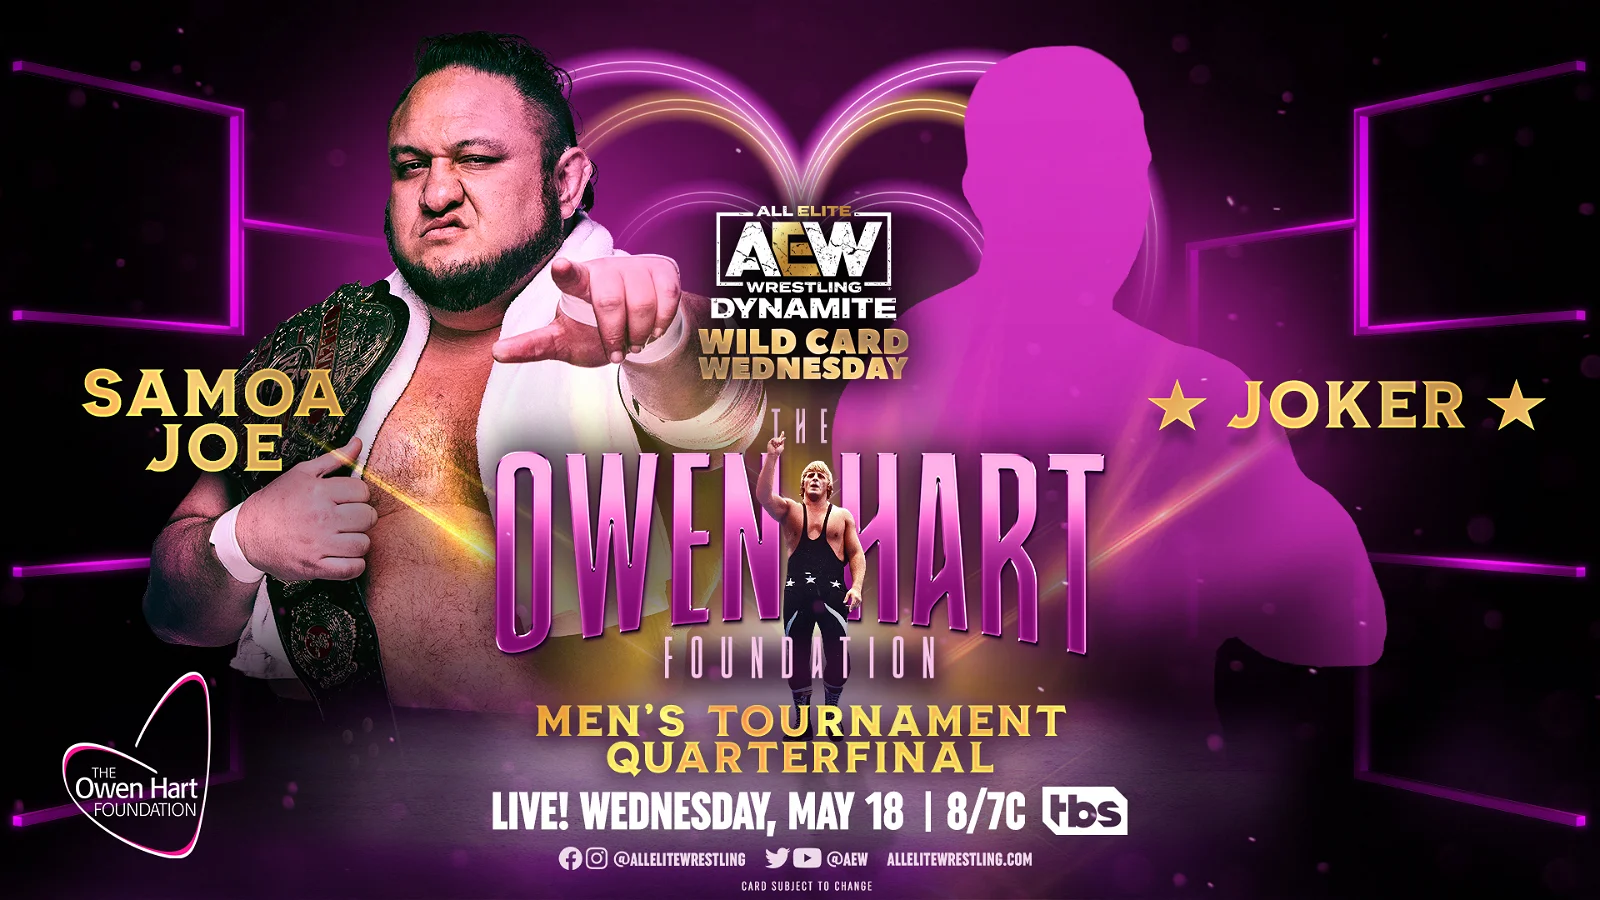 AEW Dynamite “Wild Card Wednesday” Results for May 18, 2022